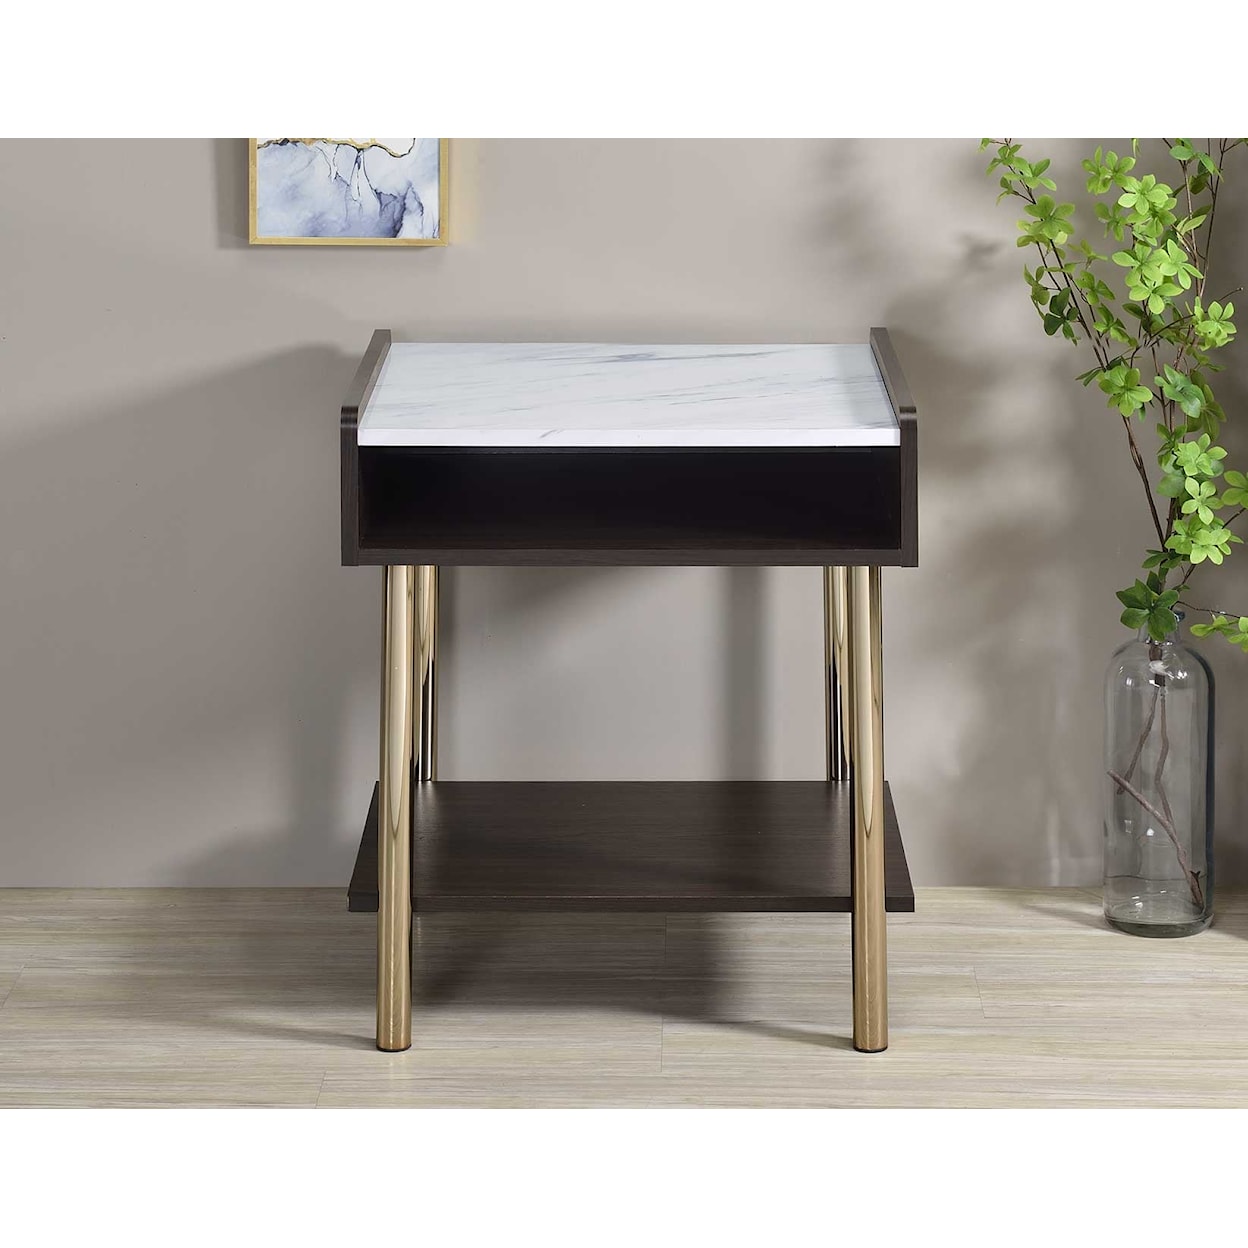 Steve Silver Carrie End Table with Storage